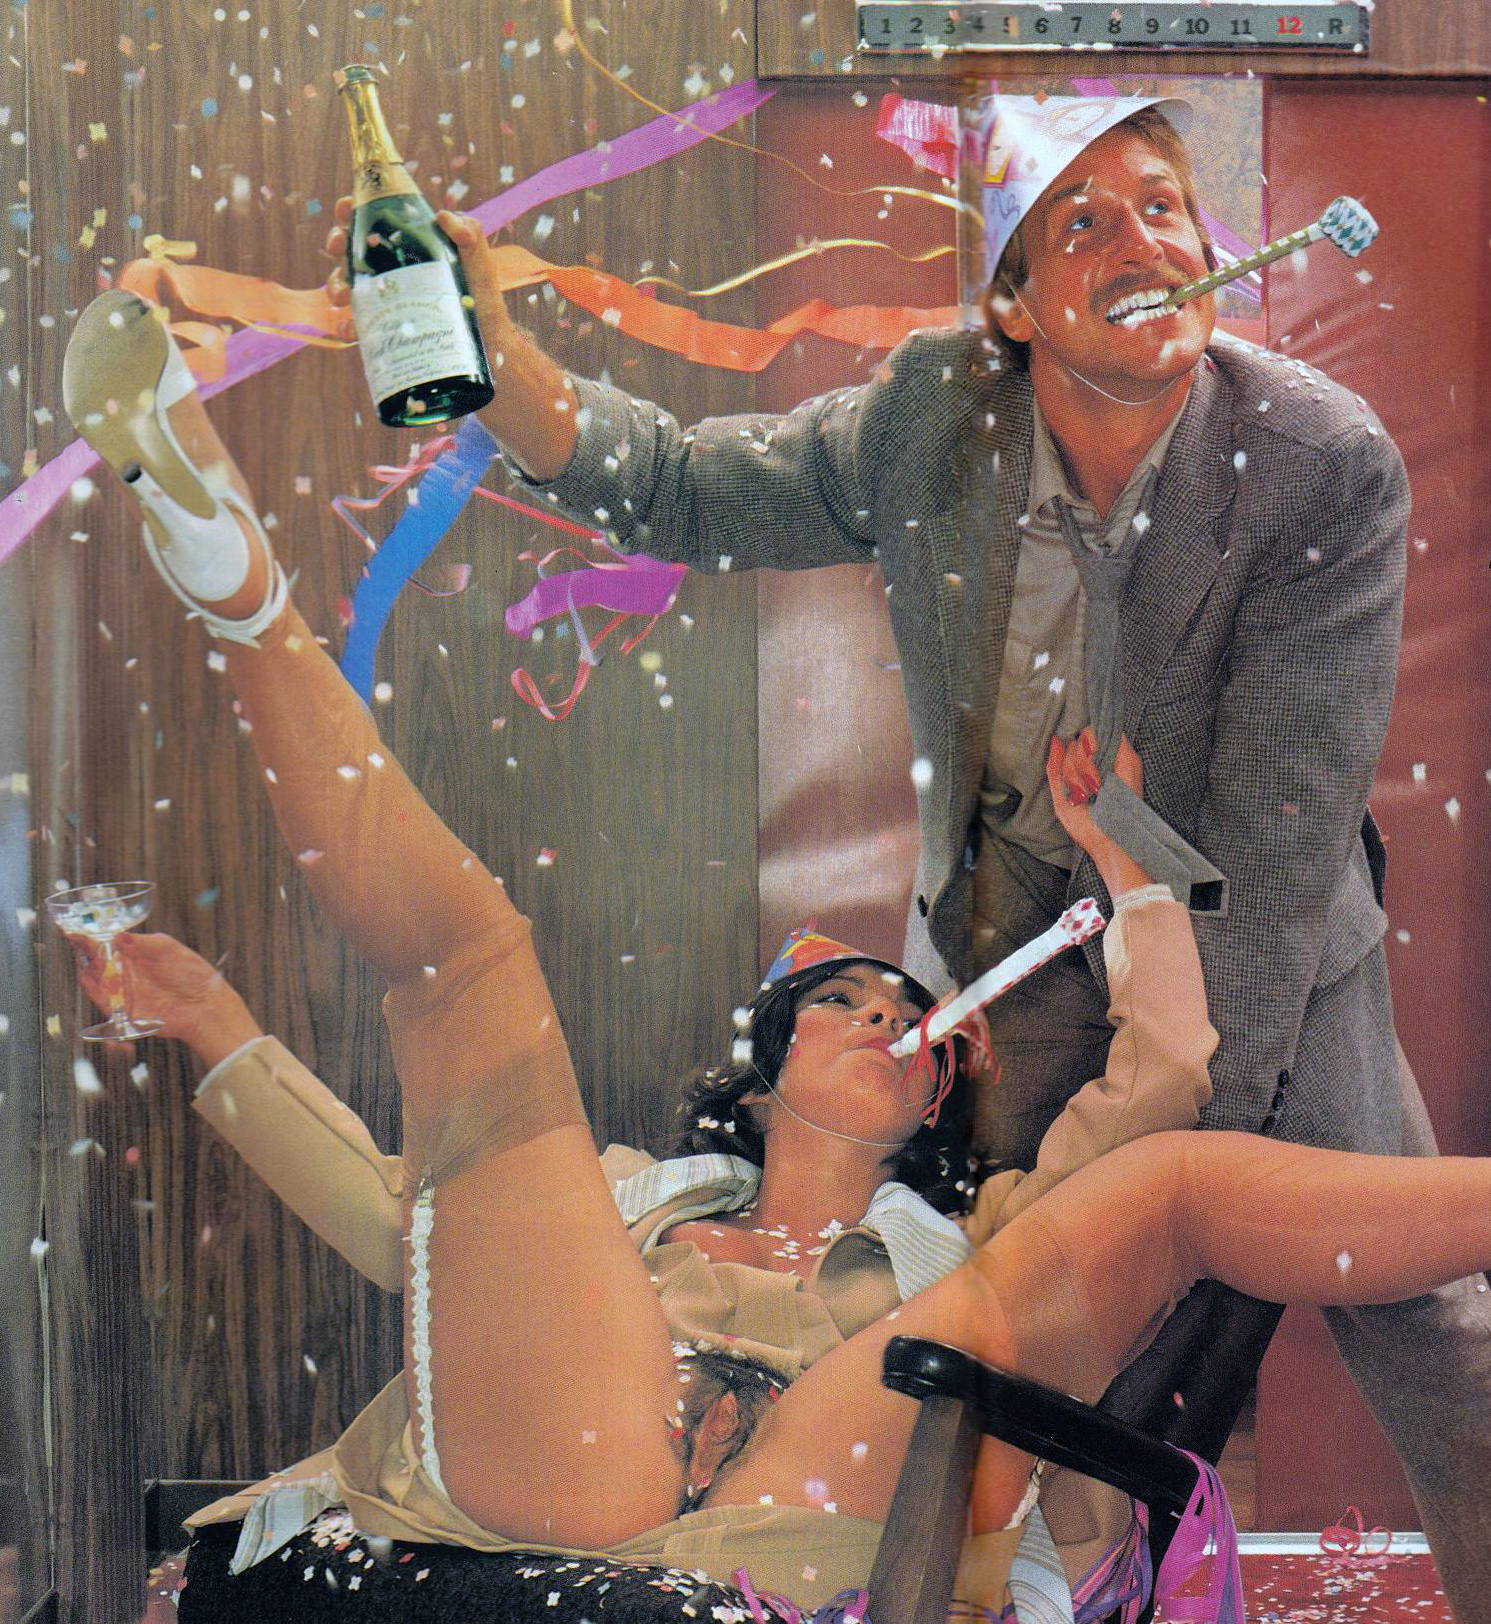 New Year's Eve Office Party Orgy / Hustler Magazine / 1982 â€” Retroâ€”Fucking